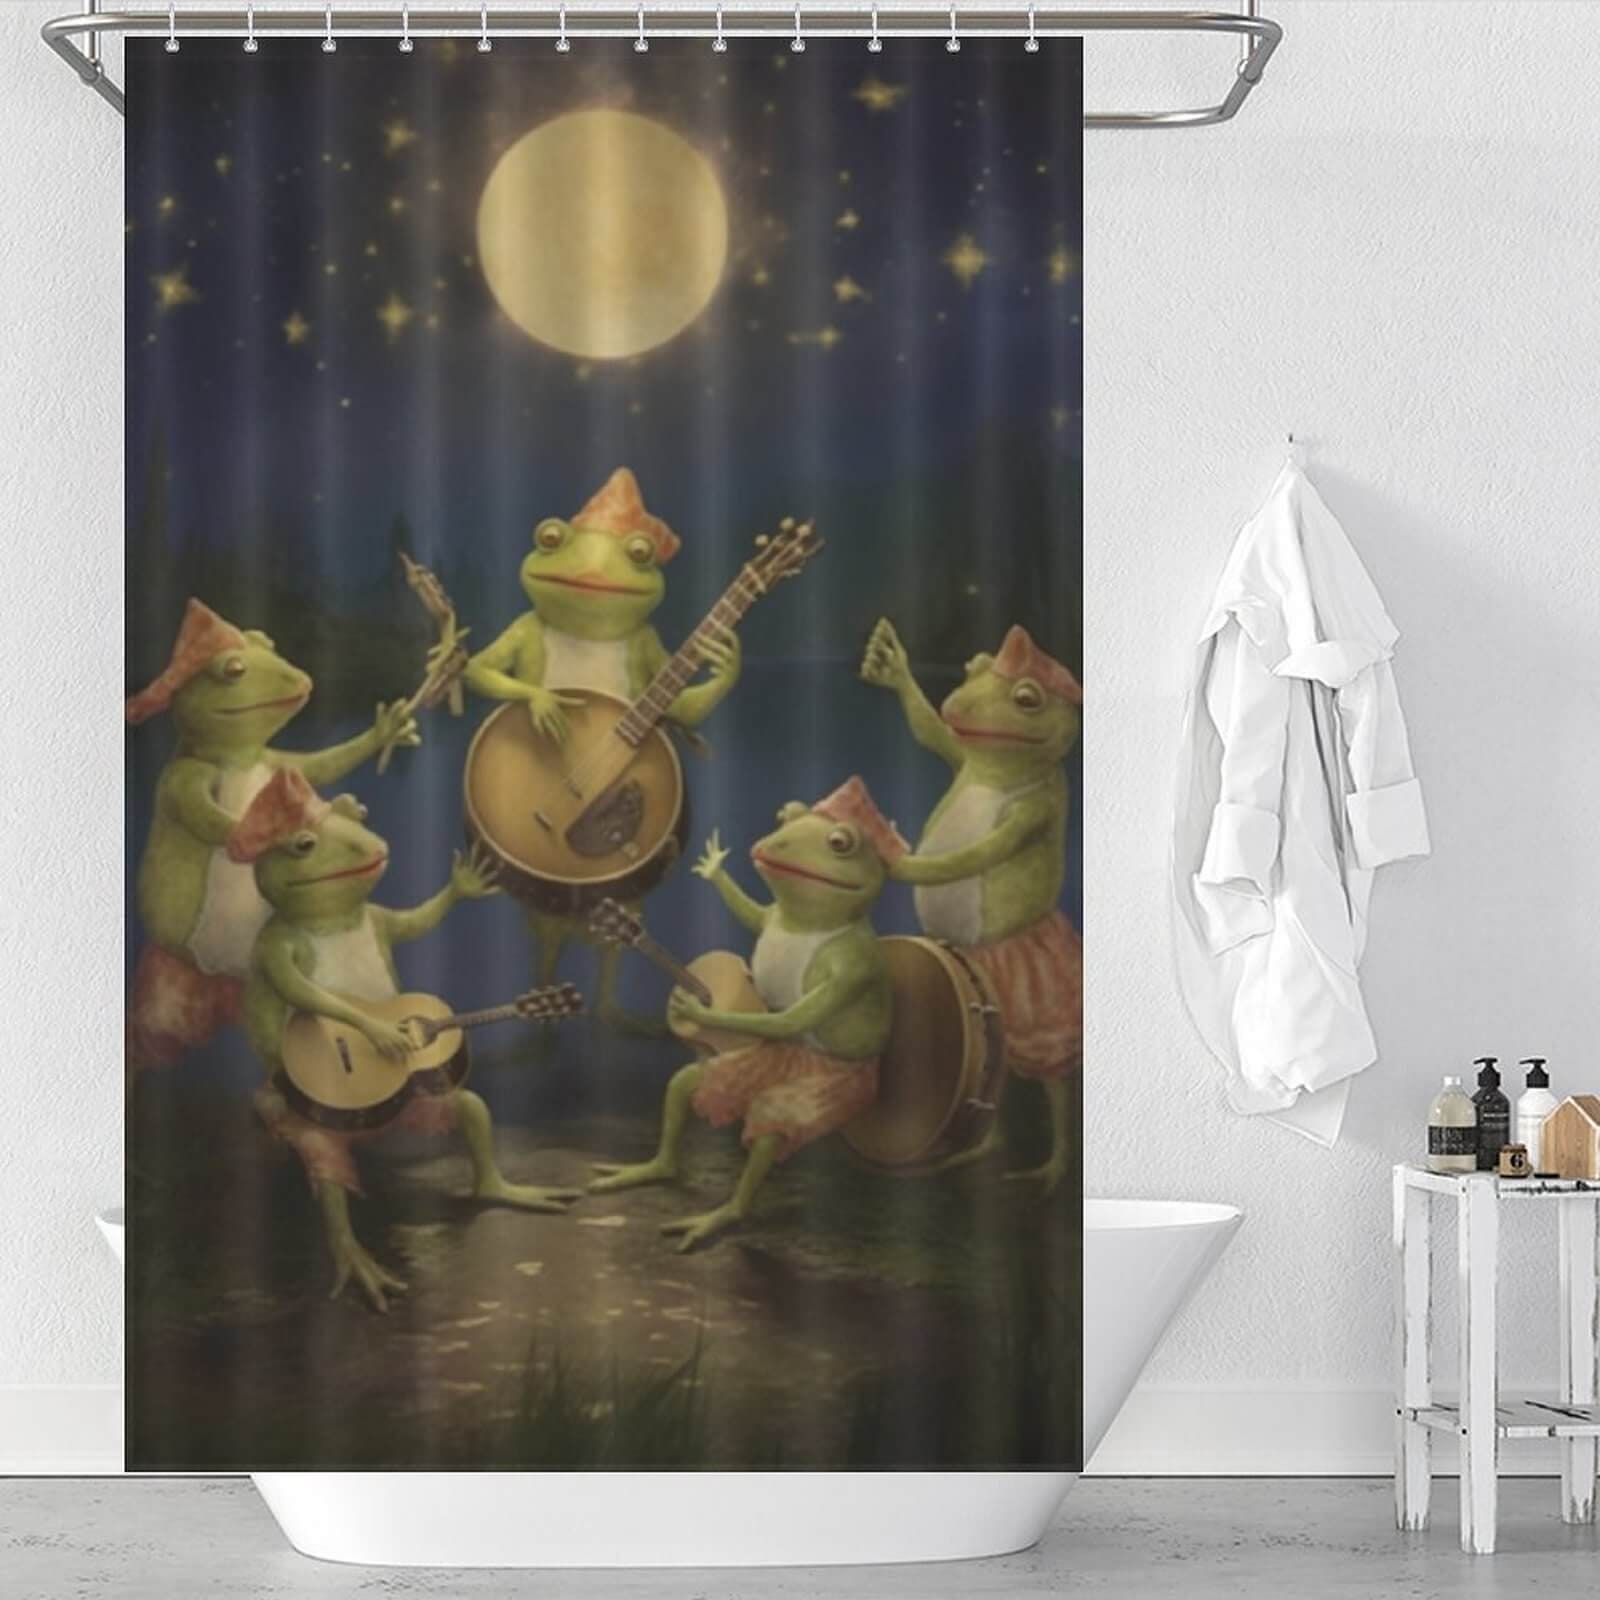 Frog Shower Curtain 